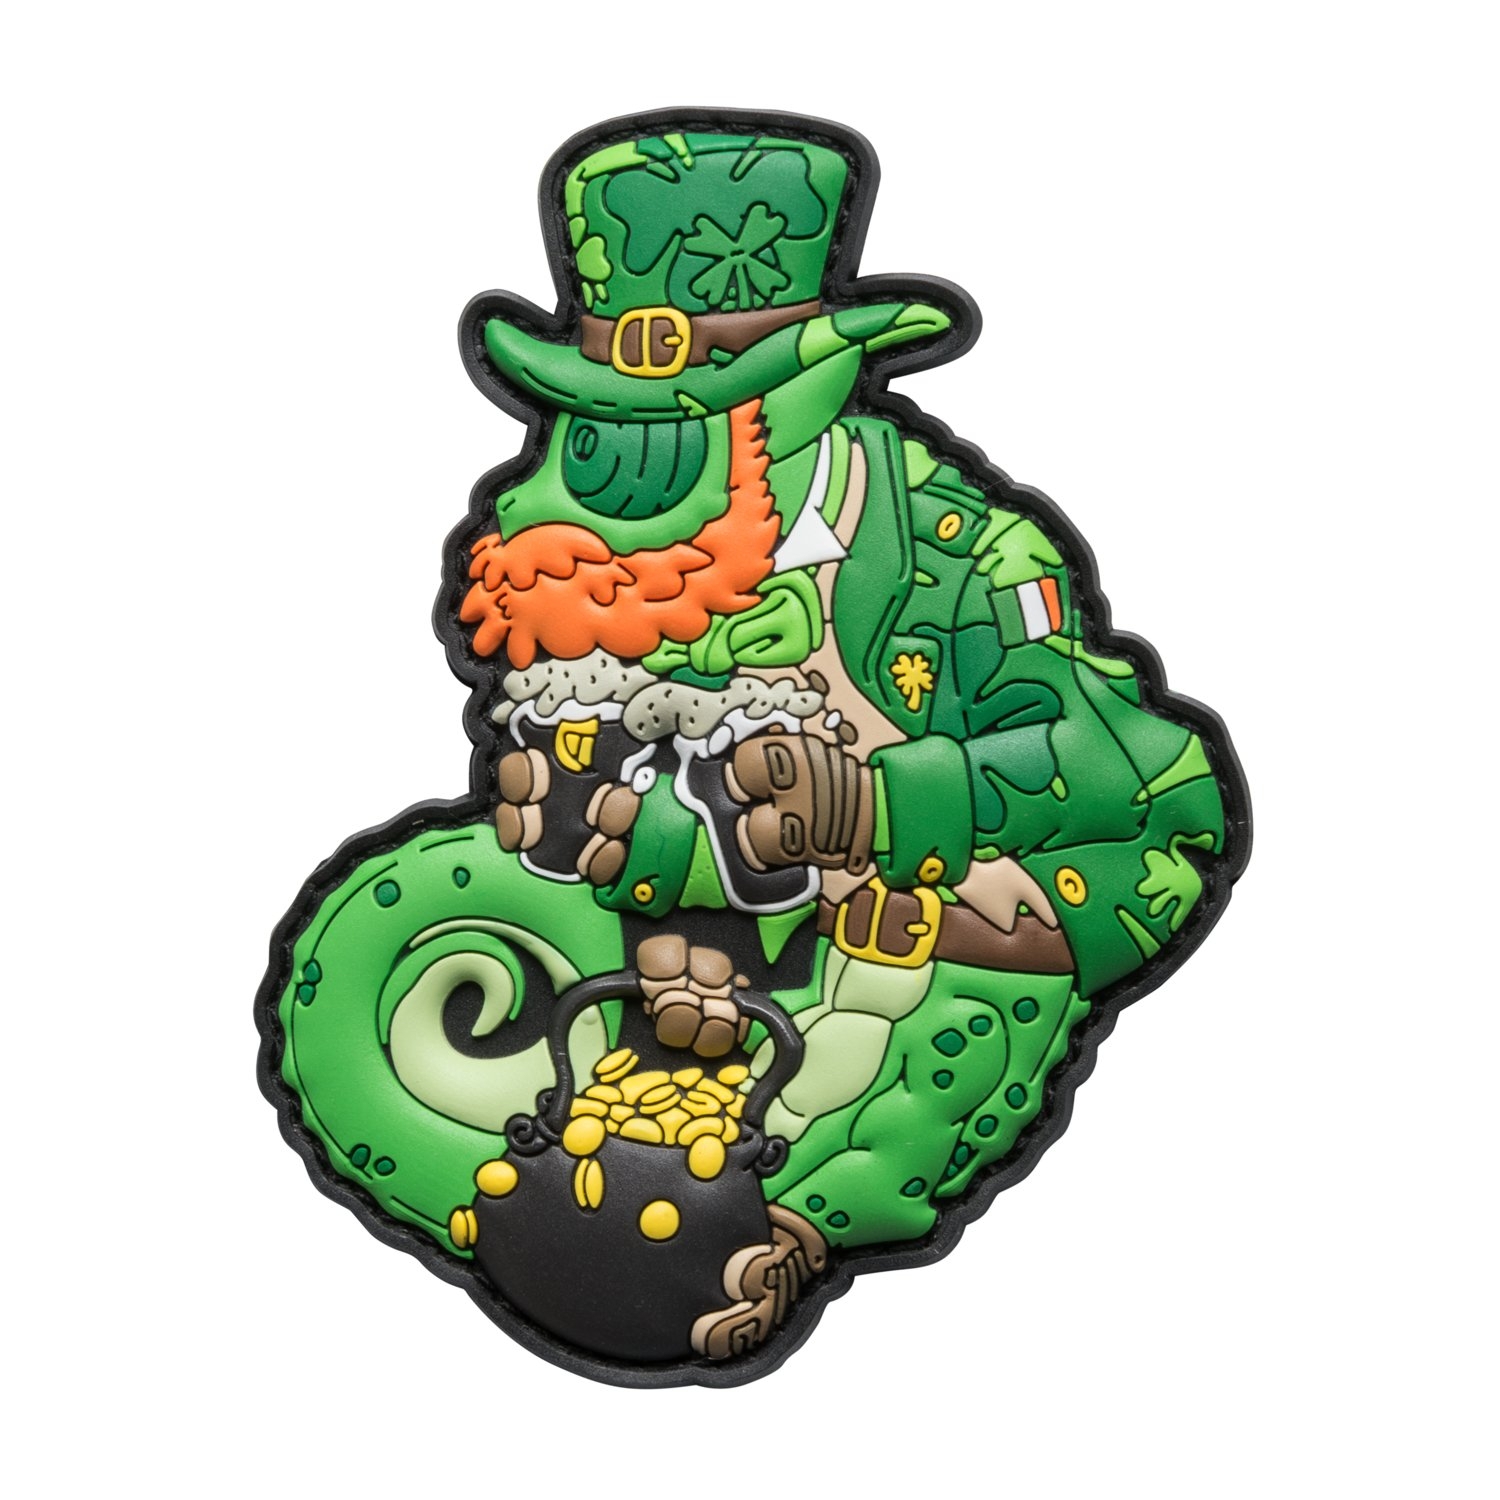 Image of Emblemat Chameleon St. Paddy Patch (OD-CST-RB-82)